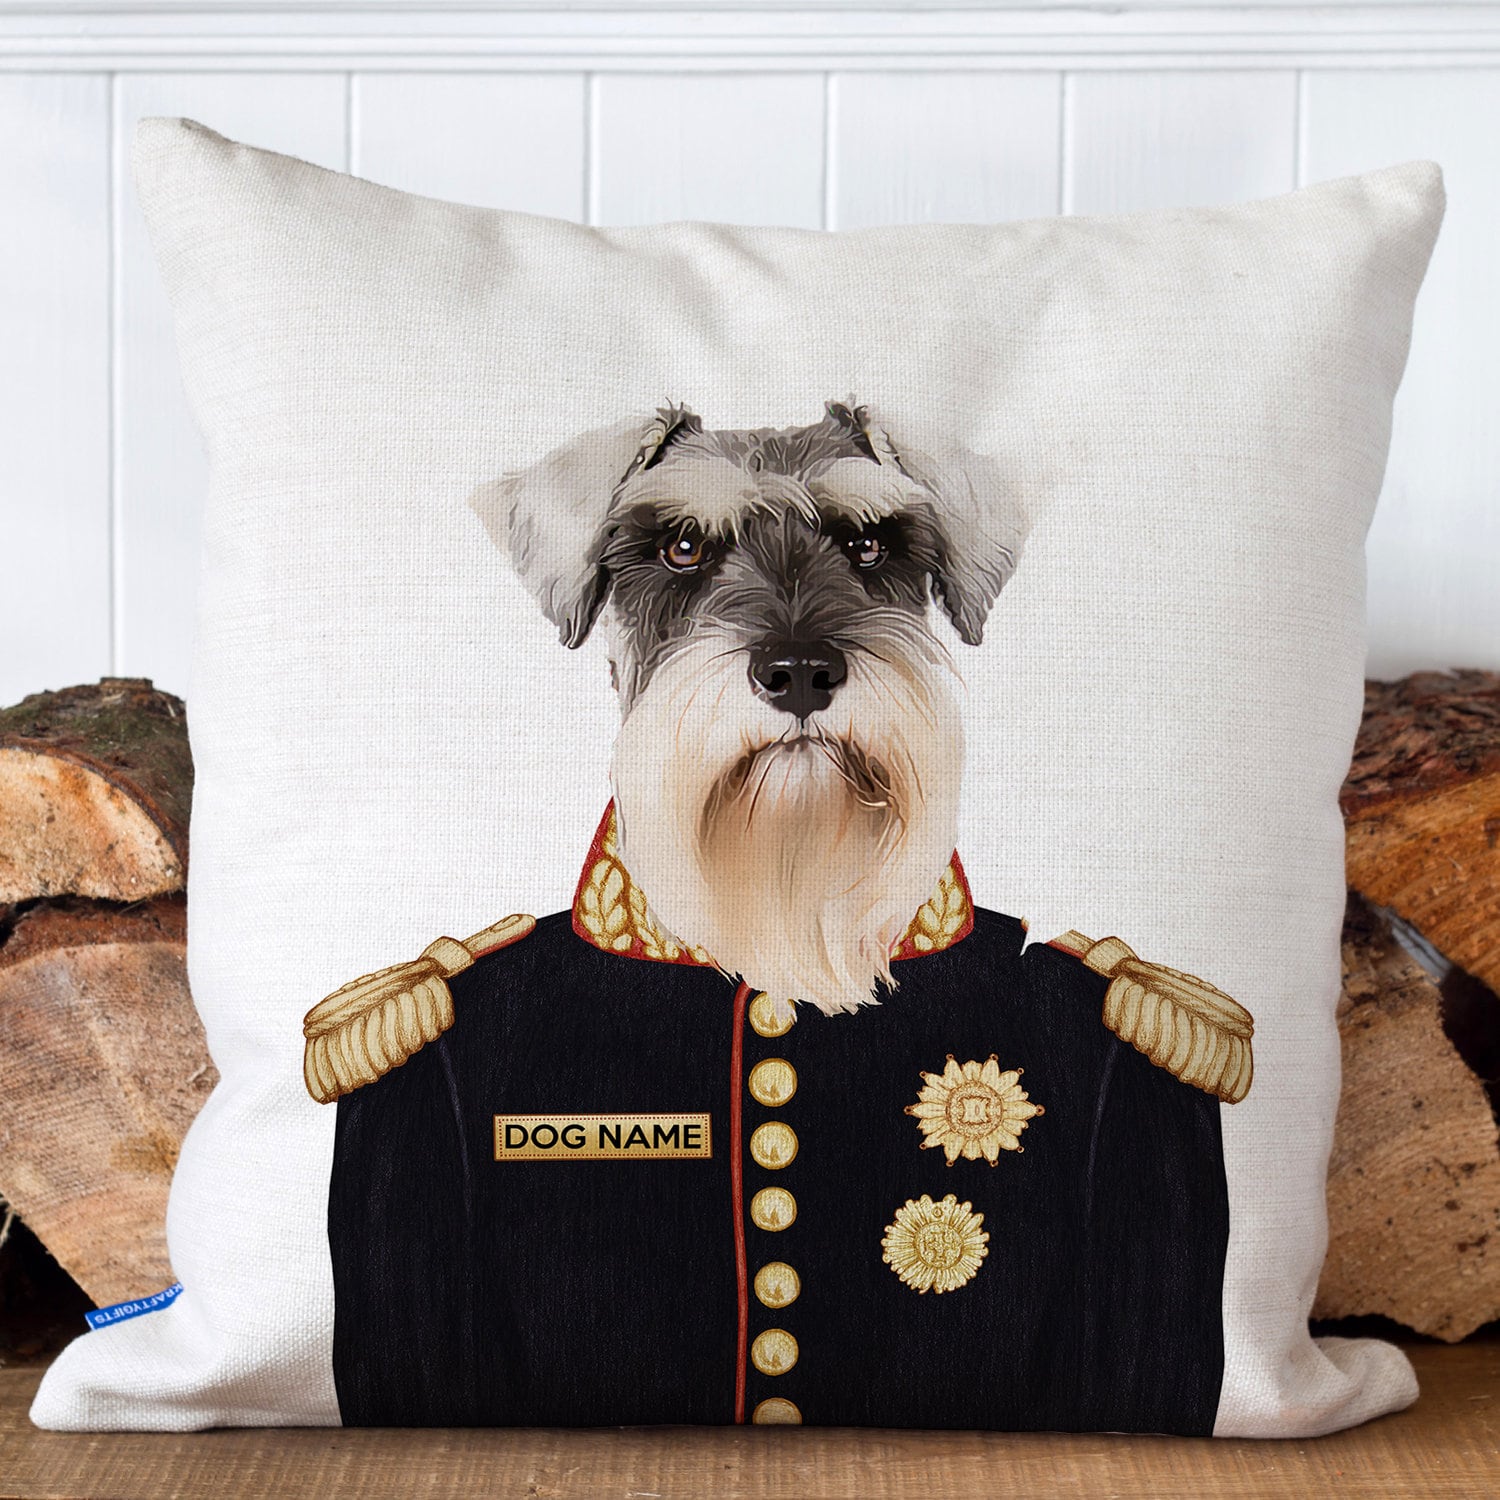 Personalised Schnauzer Cushion Cover Military Dog Pillow Pet Name Puppy  Throw Dogs Breed Dog Home Decor Gift FDC32 -  UK